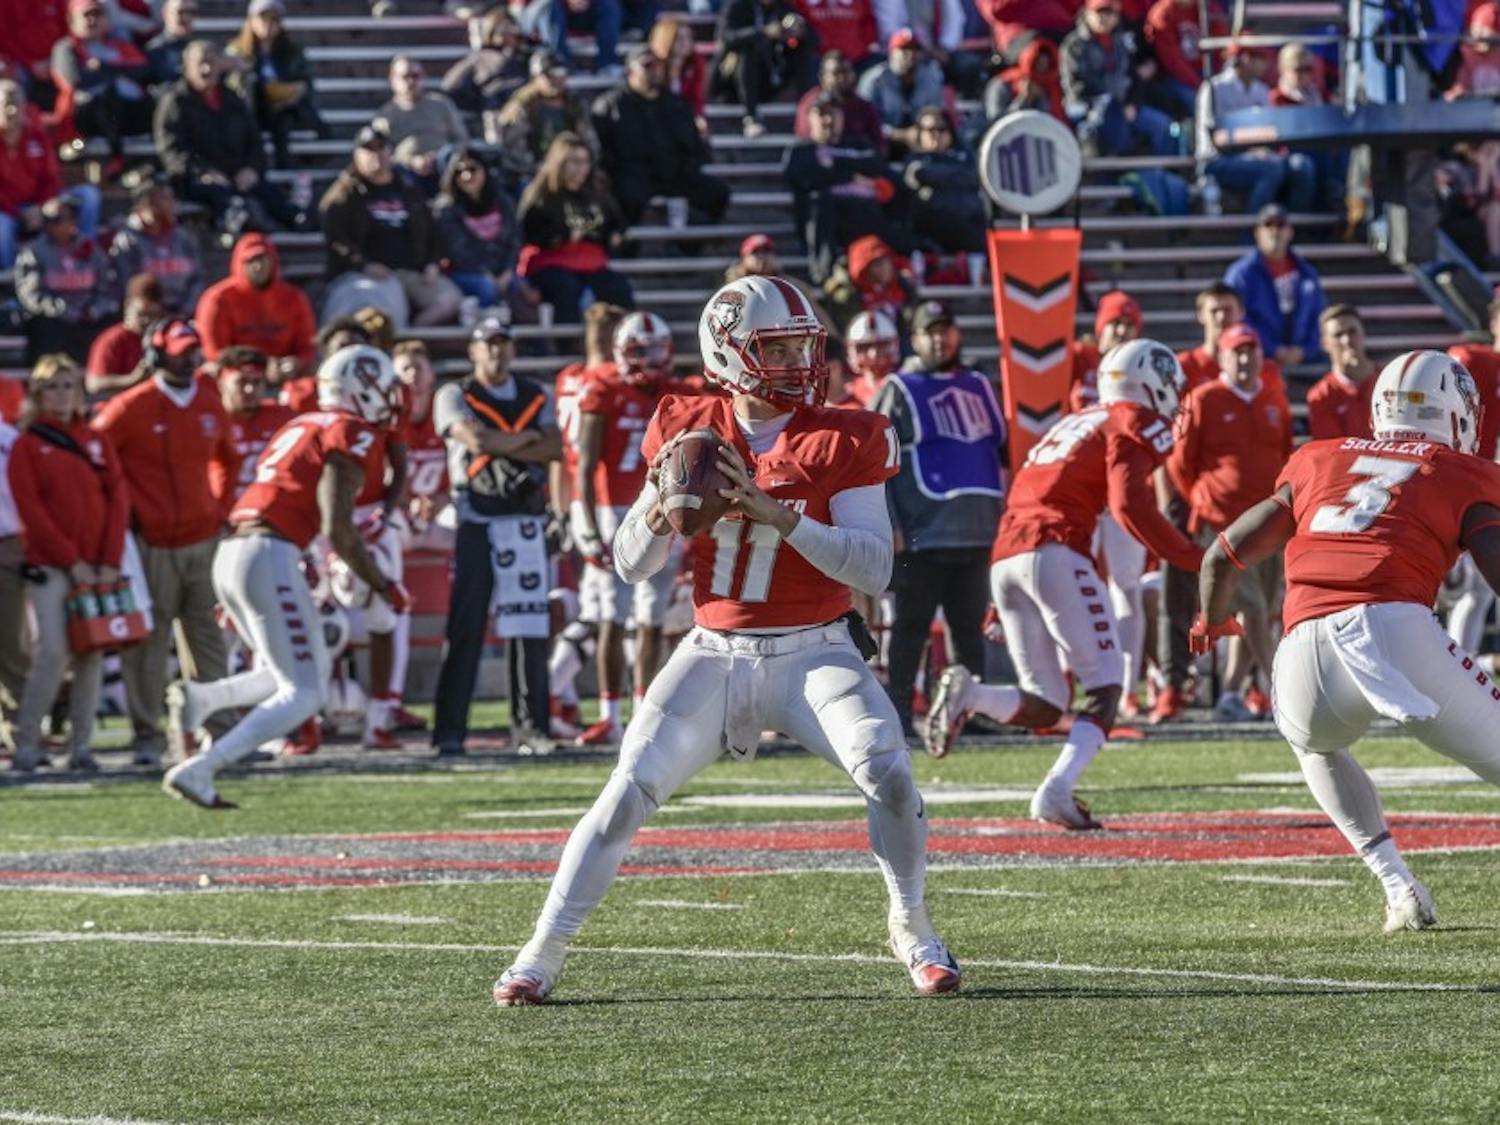 Coltin Gerhart (#11) prepares to pass the ball during the last football game of the year for UNM. UNM football took a crushing blow from Wyoming at Dreamstyle Stadium on Nov. 24, 2018.